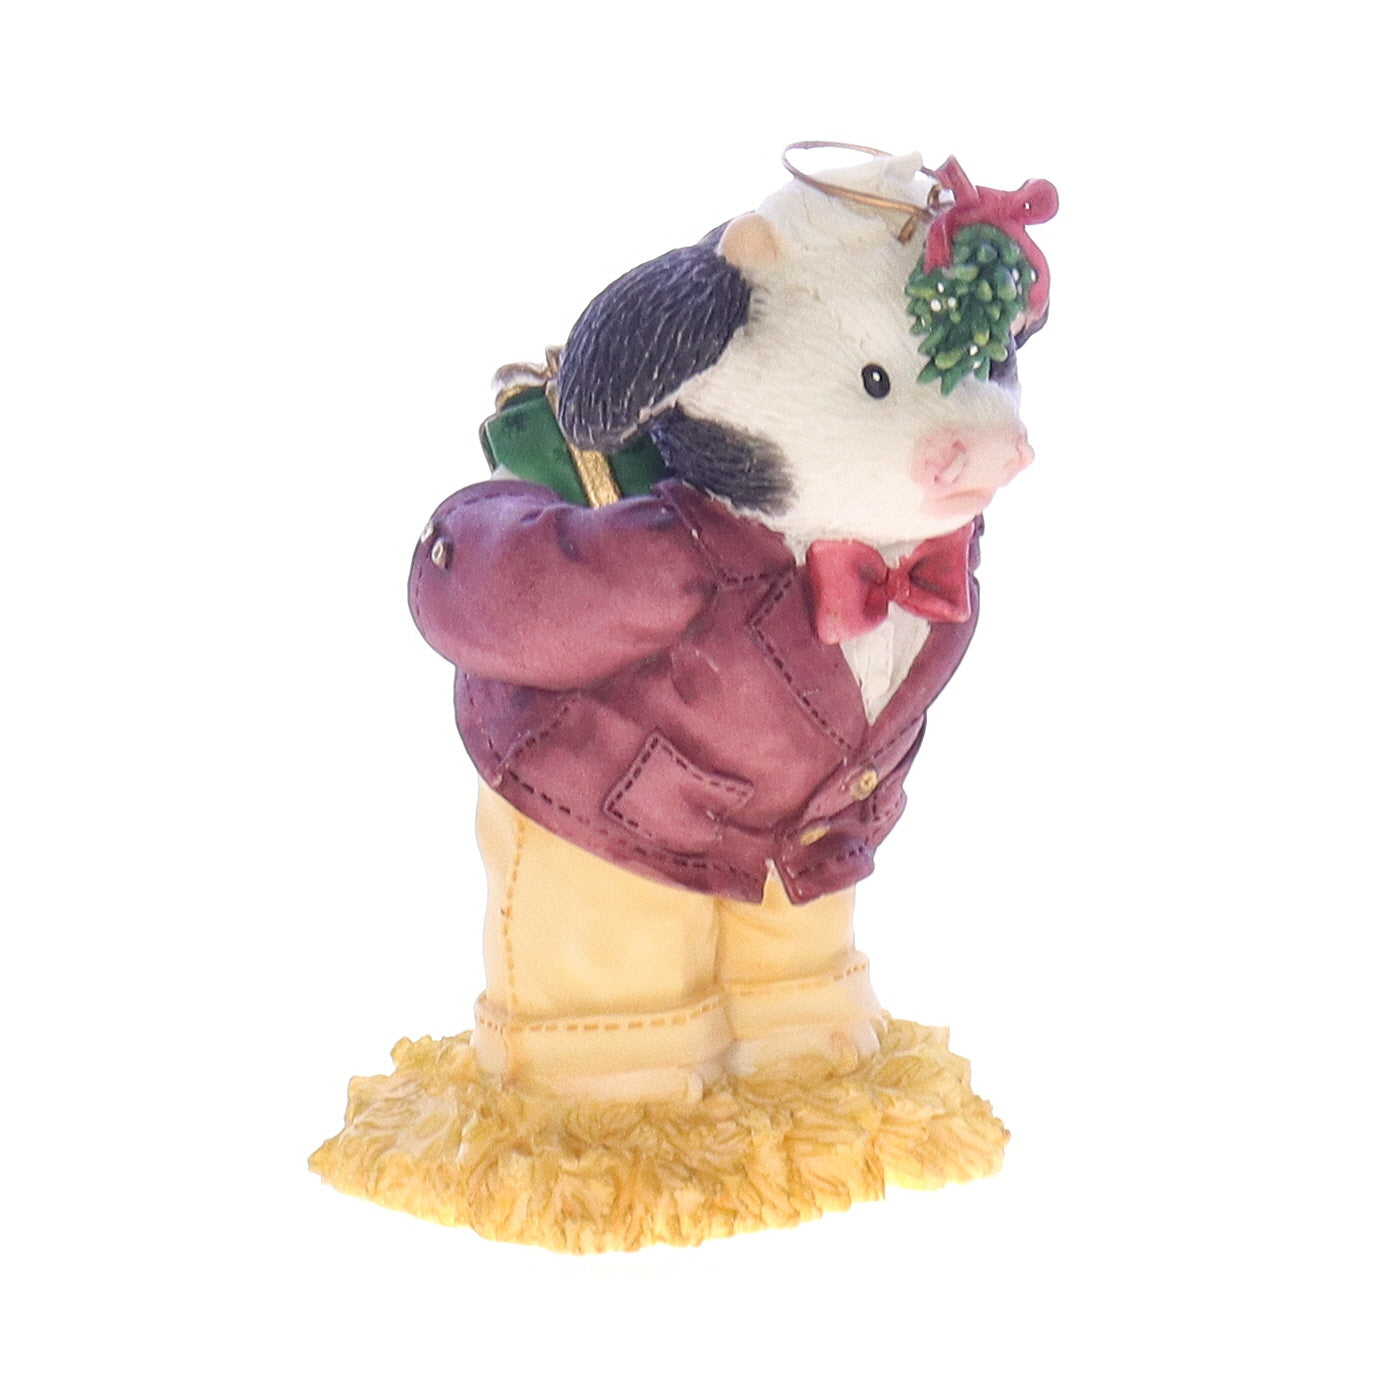 Marys_Moo_Moos_480959_Me_And_Moo_Under_The_Mistletoe_Christmas_Figurine_1999 Front Right View